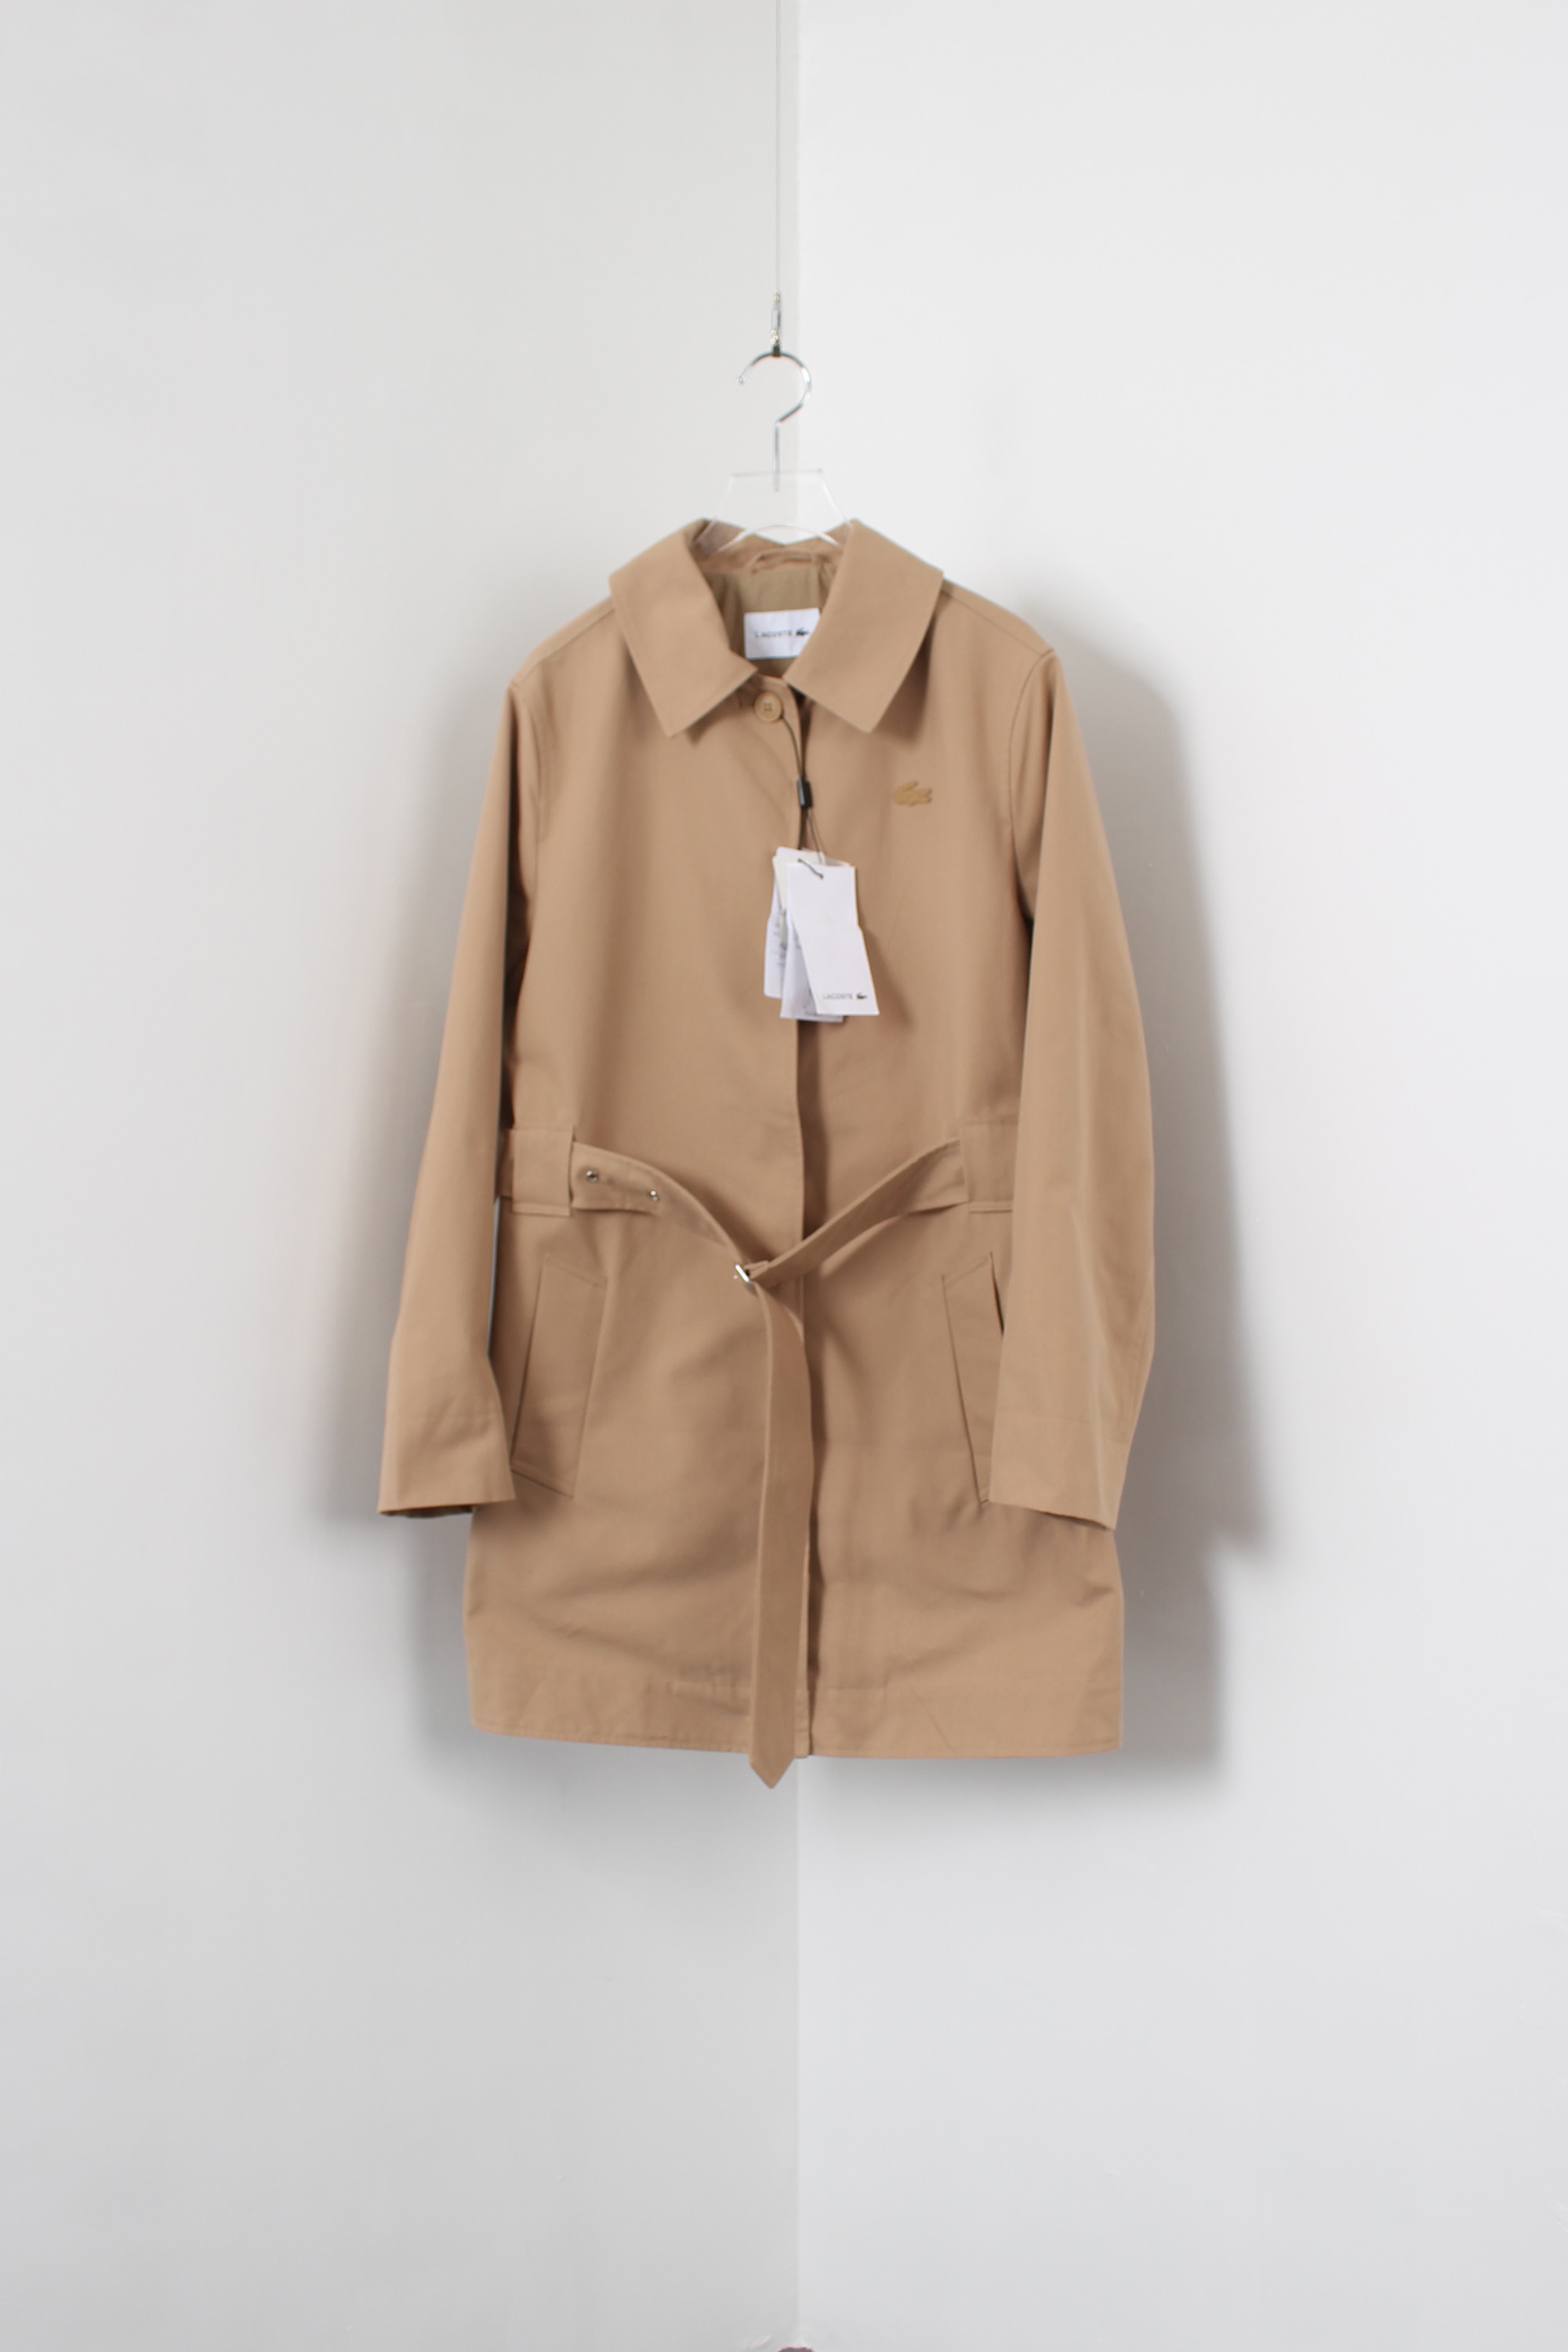 Lacoste trench coat